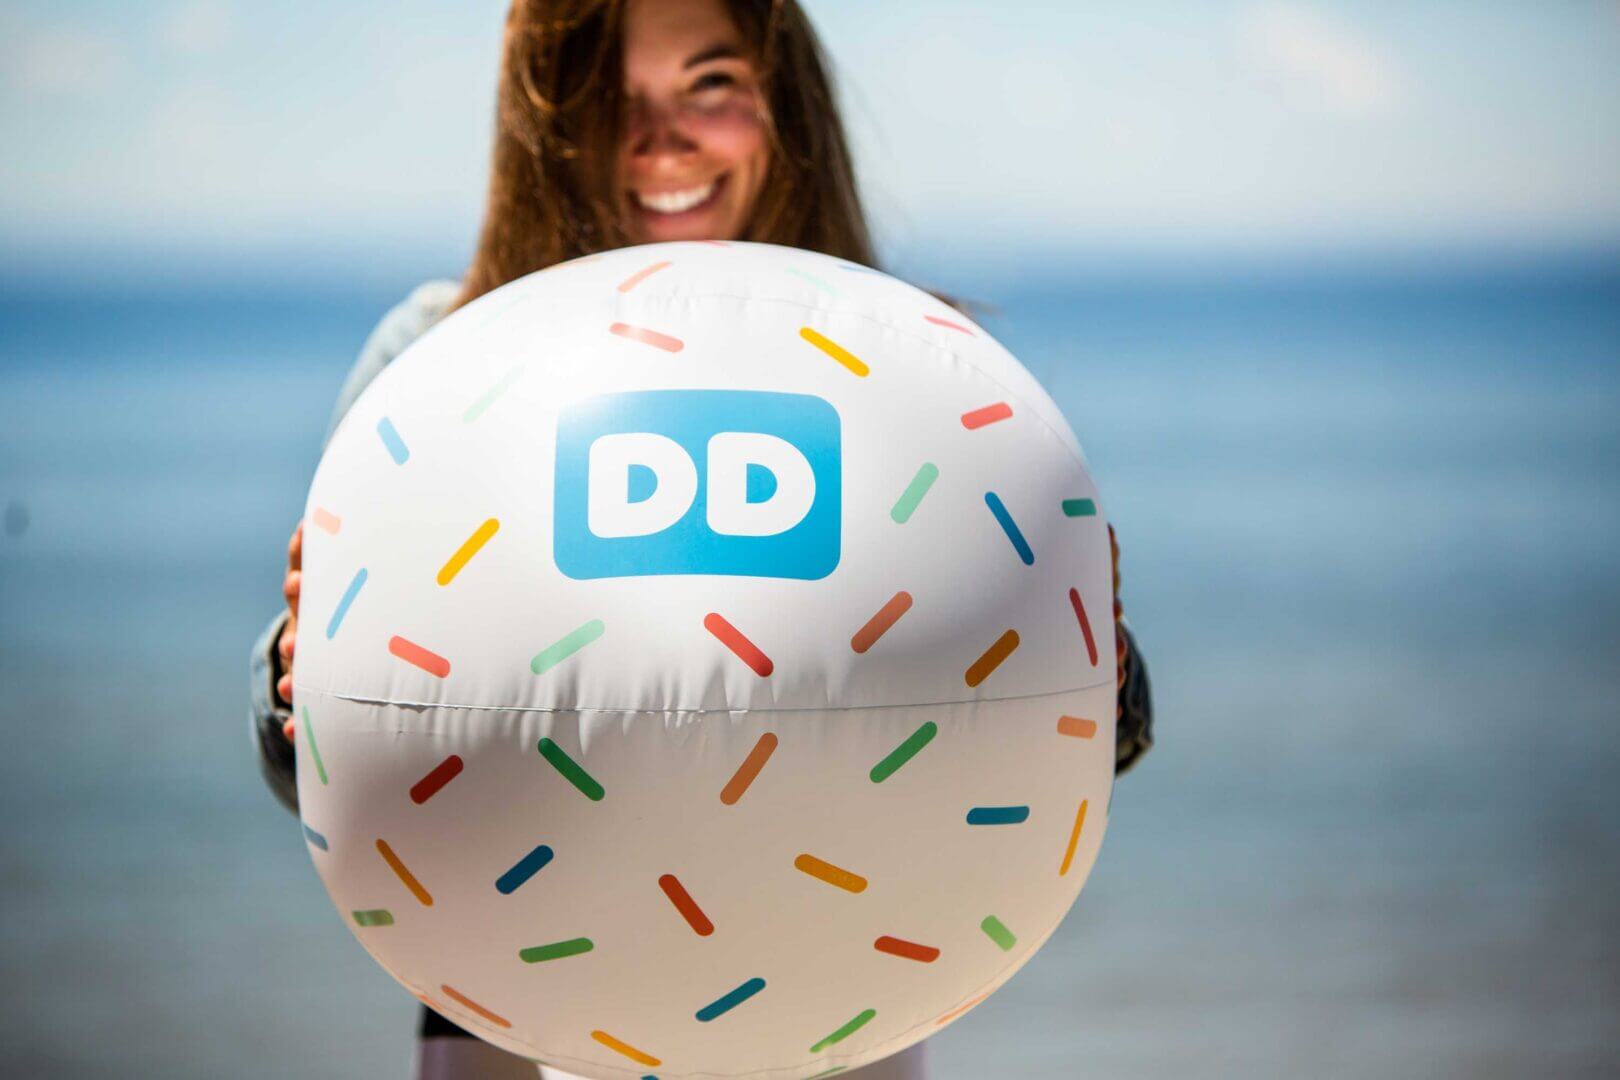 Smiling woman outside holding a large beachball with Dunkin Donuts logo